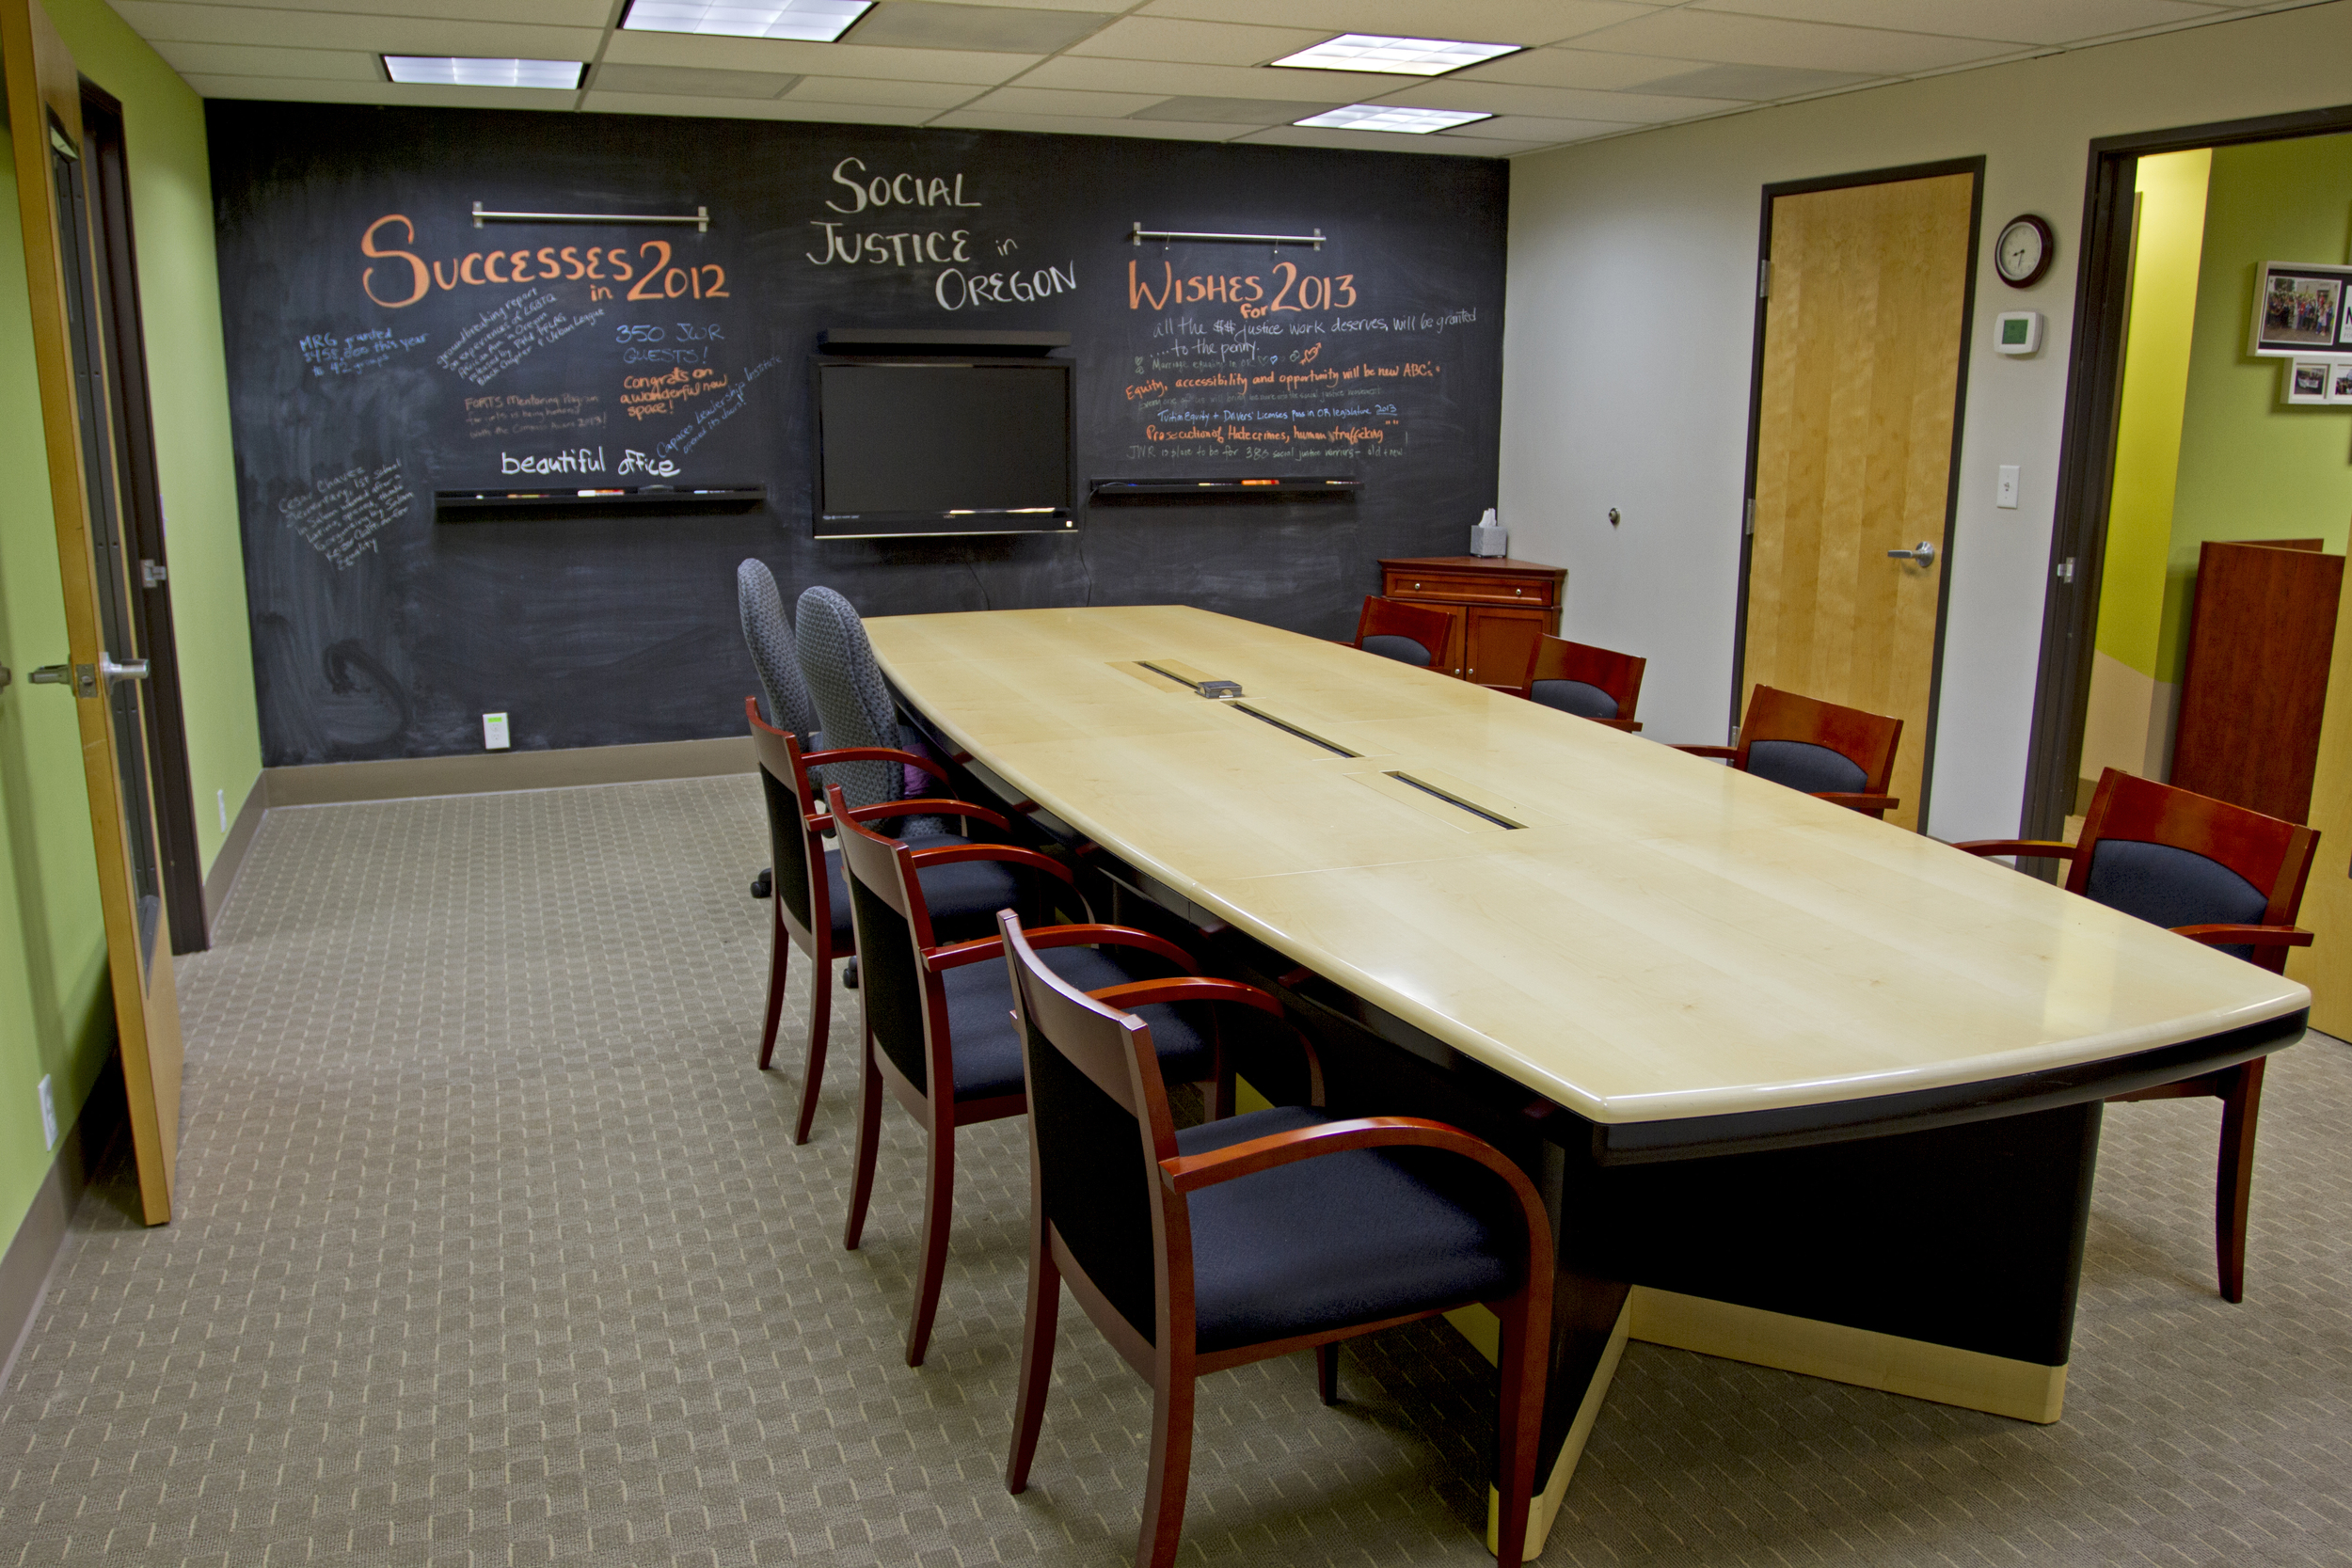  After: one of the main goals was to provide a dynamic gathering&nbsp;space for MRG to meet and discuss ideas. &nbsp;Chalkboard paint and picture rails give the members plenty of space to interact, and share ideas, while also diminishing the presence